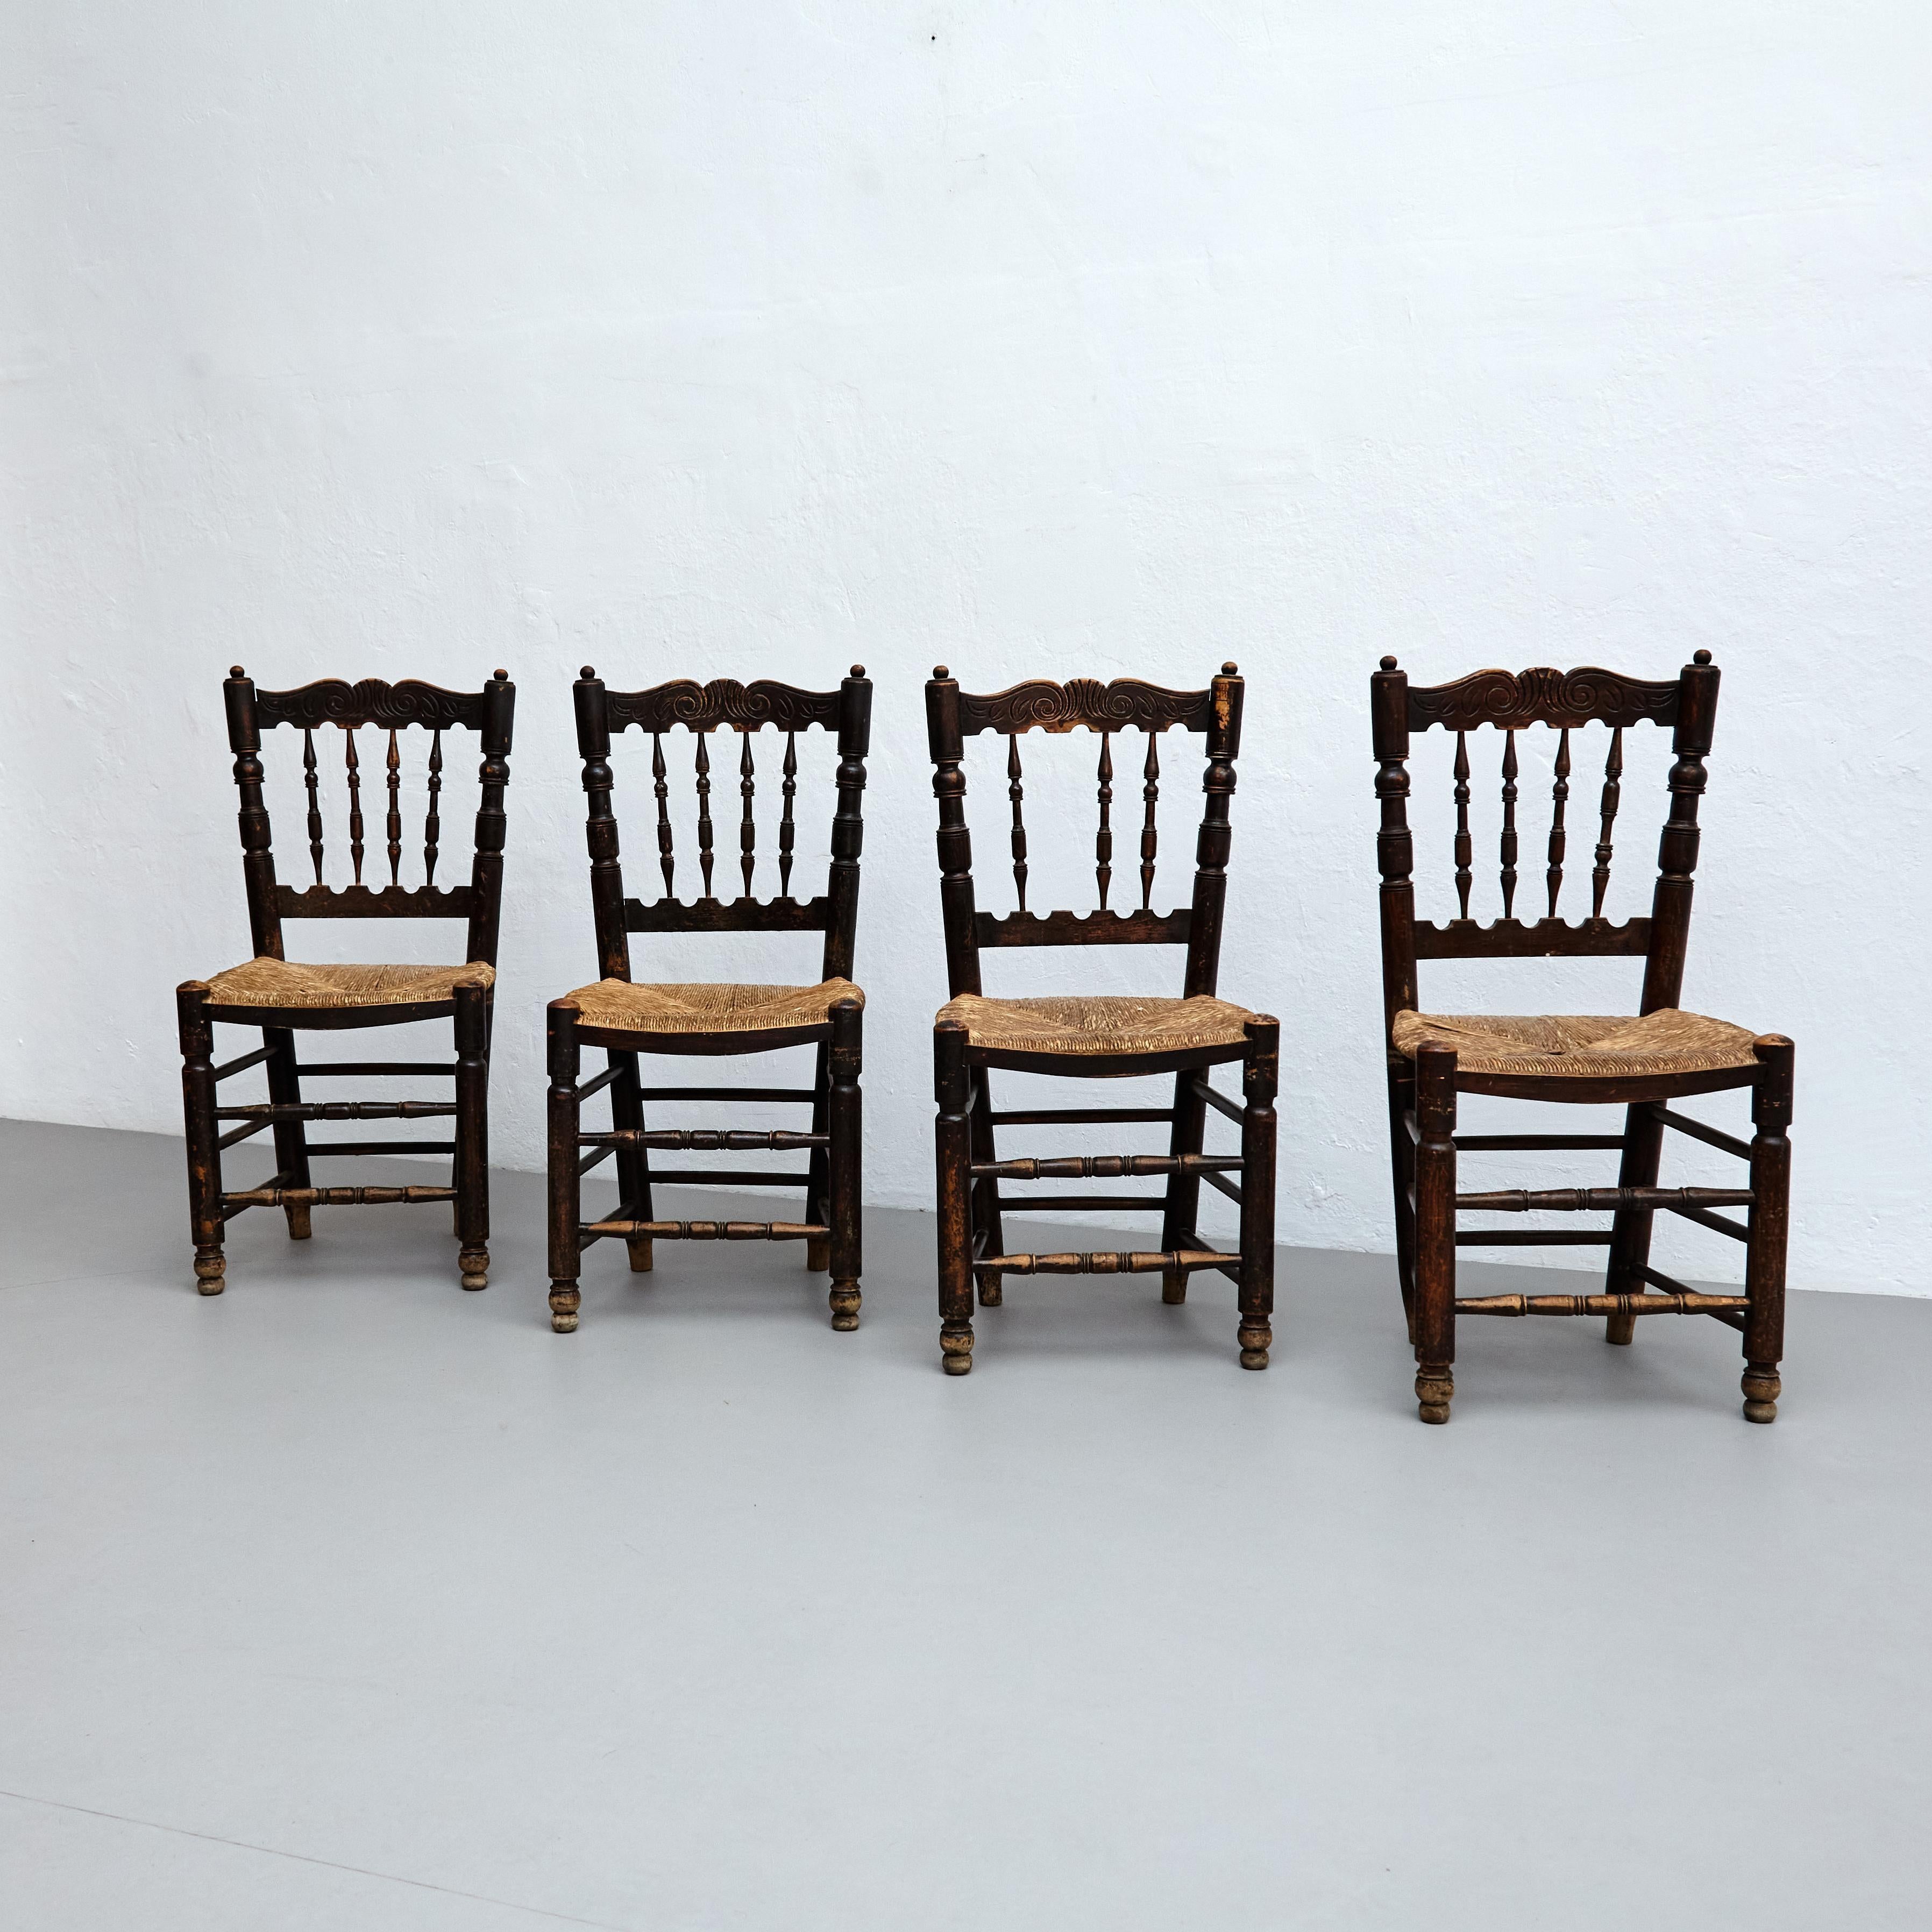 Set of four rustic wood French chairs.

Manufactured in French, circa 1950.

In original condition with minor wear consistent of age and use, preserving a beautiful patina.

Materials: 
Wood, rattan

Dimensions: 
D 38.5 cm x W 42.2 cm x H 87.5 cm